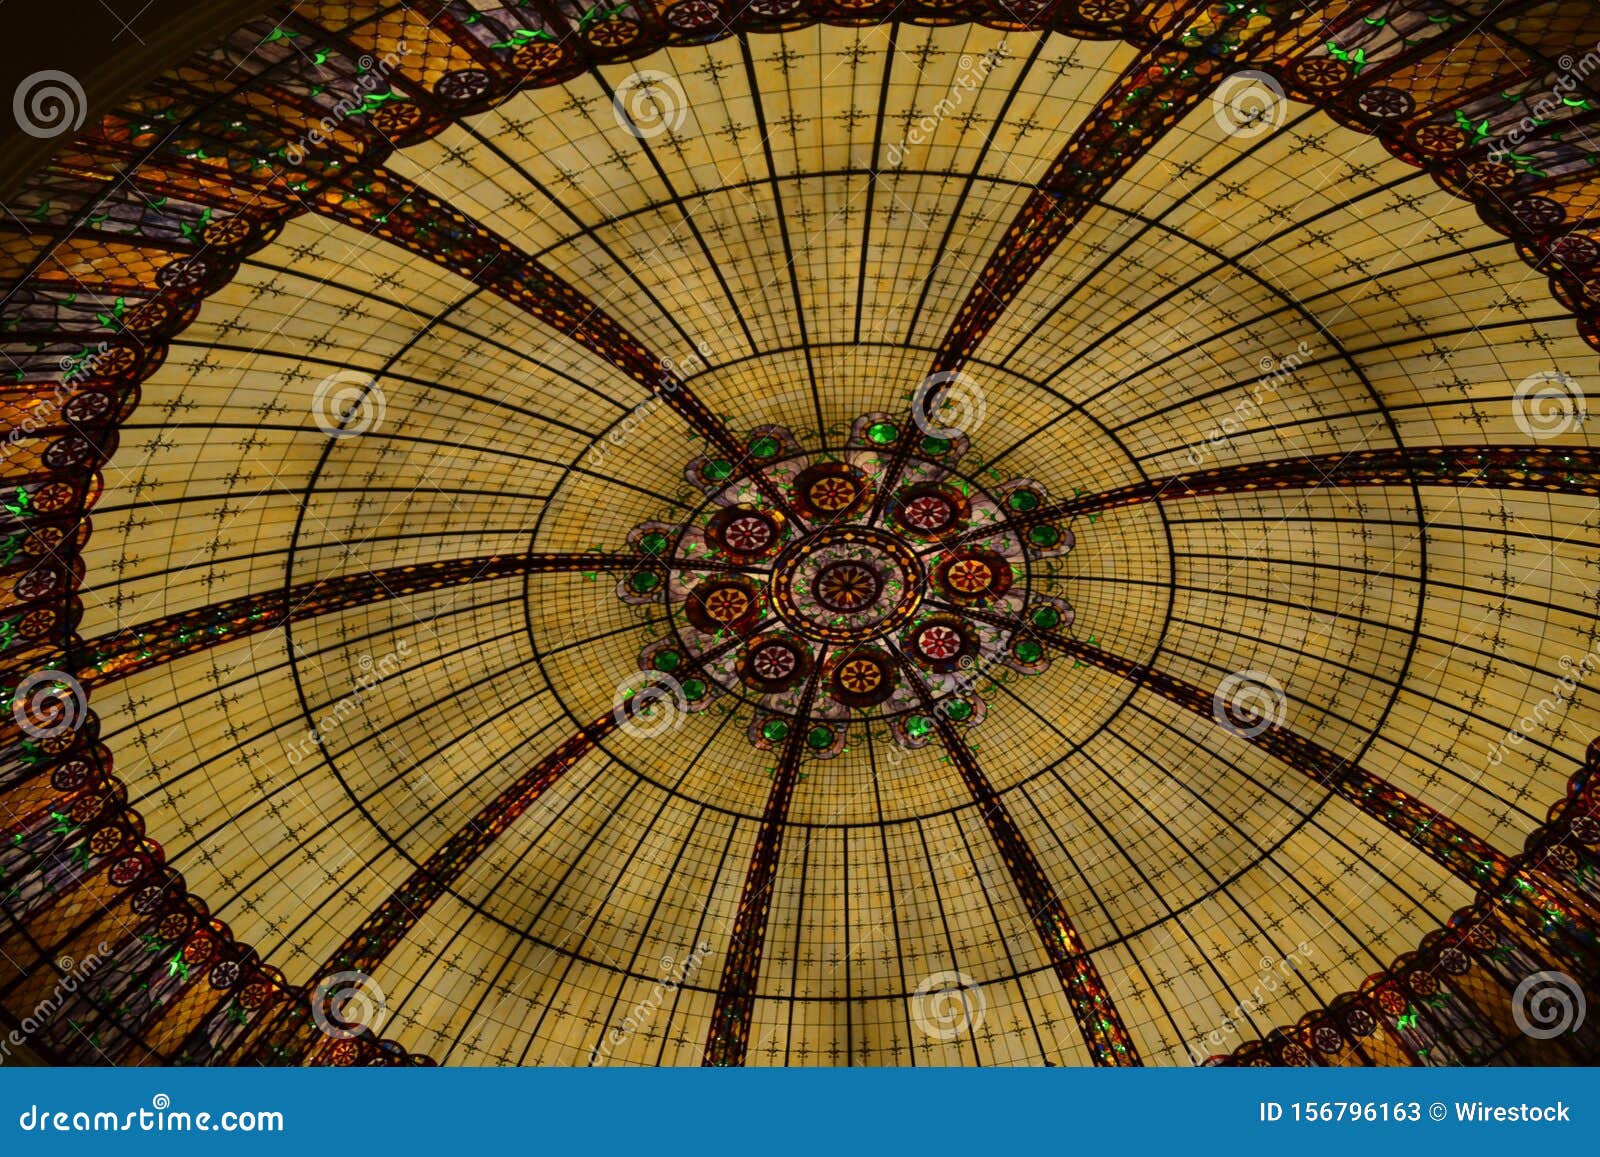 Download Low Angle Shot Of The Ceiling Of Paris Nevada Hotel And ...